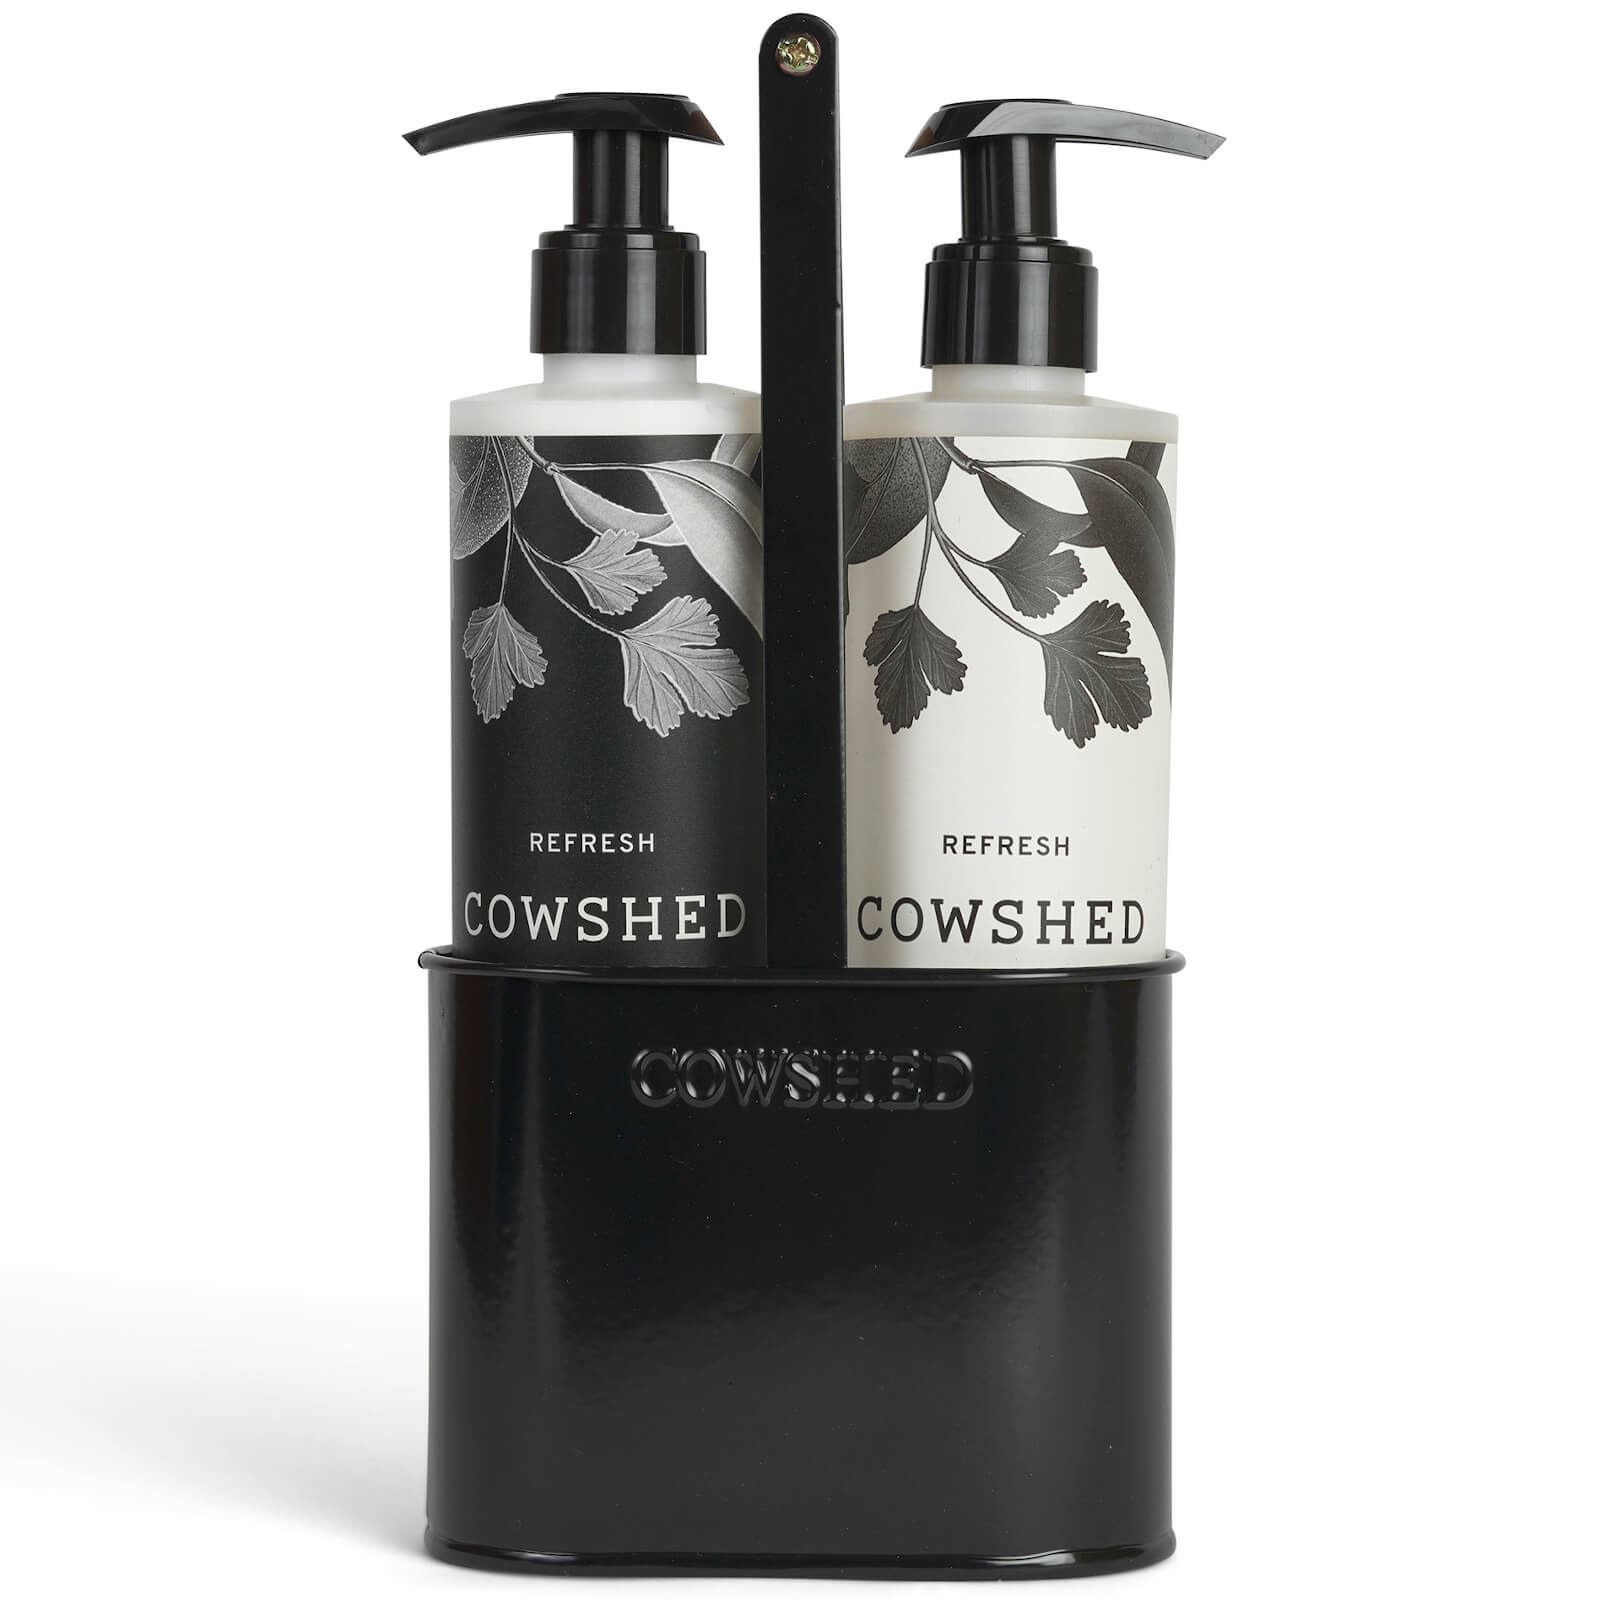 Cowshed Refresh Hand Care Caddy